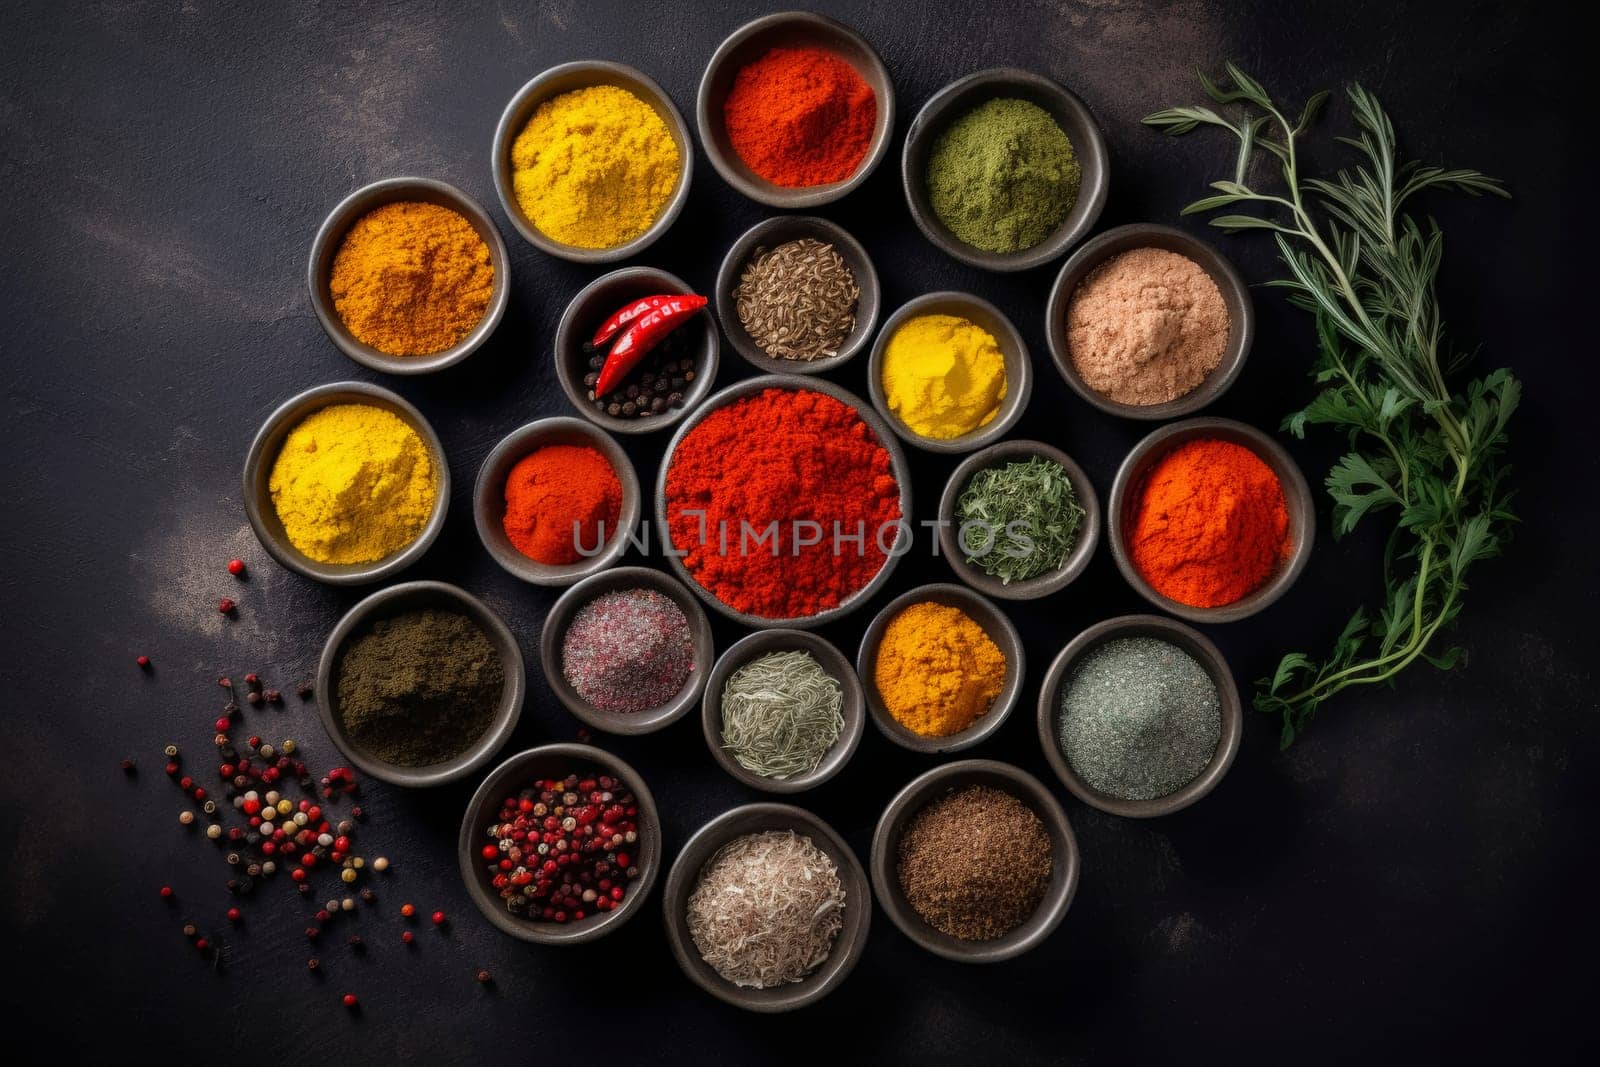 Assorted spices in round bowls on dark background. Culinary arts and seasoning concept. Design for recipe book, blog, poster. Flat lay composition with copy space